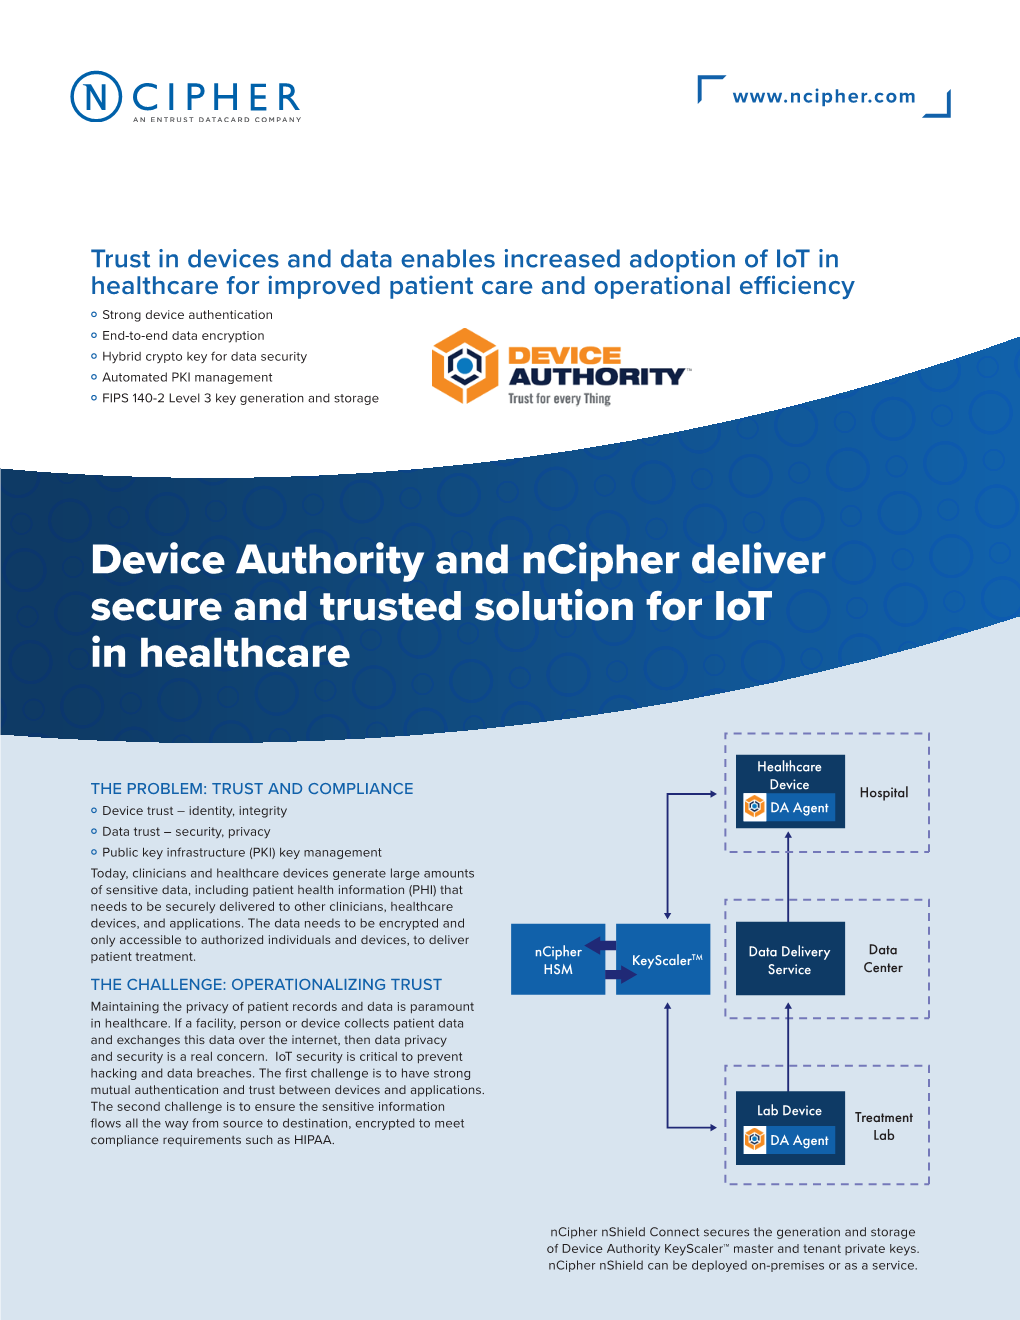 Device Authority and Ncipher Deliver Secure and Trusted Solution for Iot in Healthcare